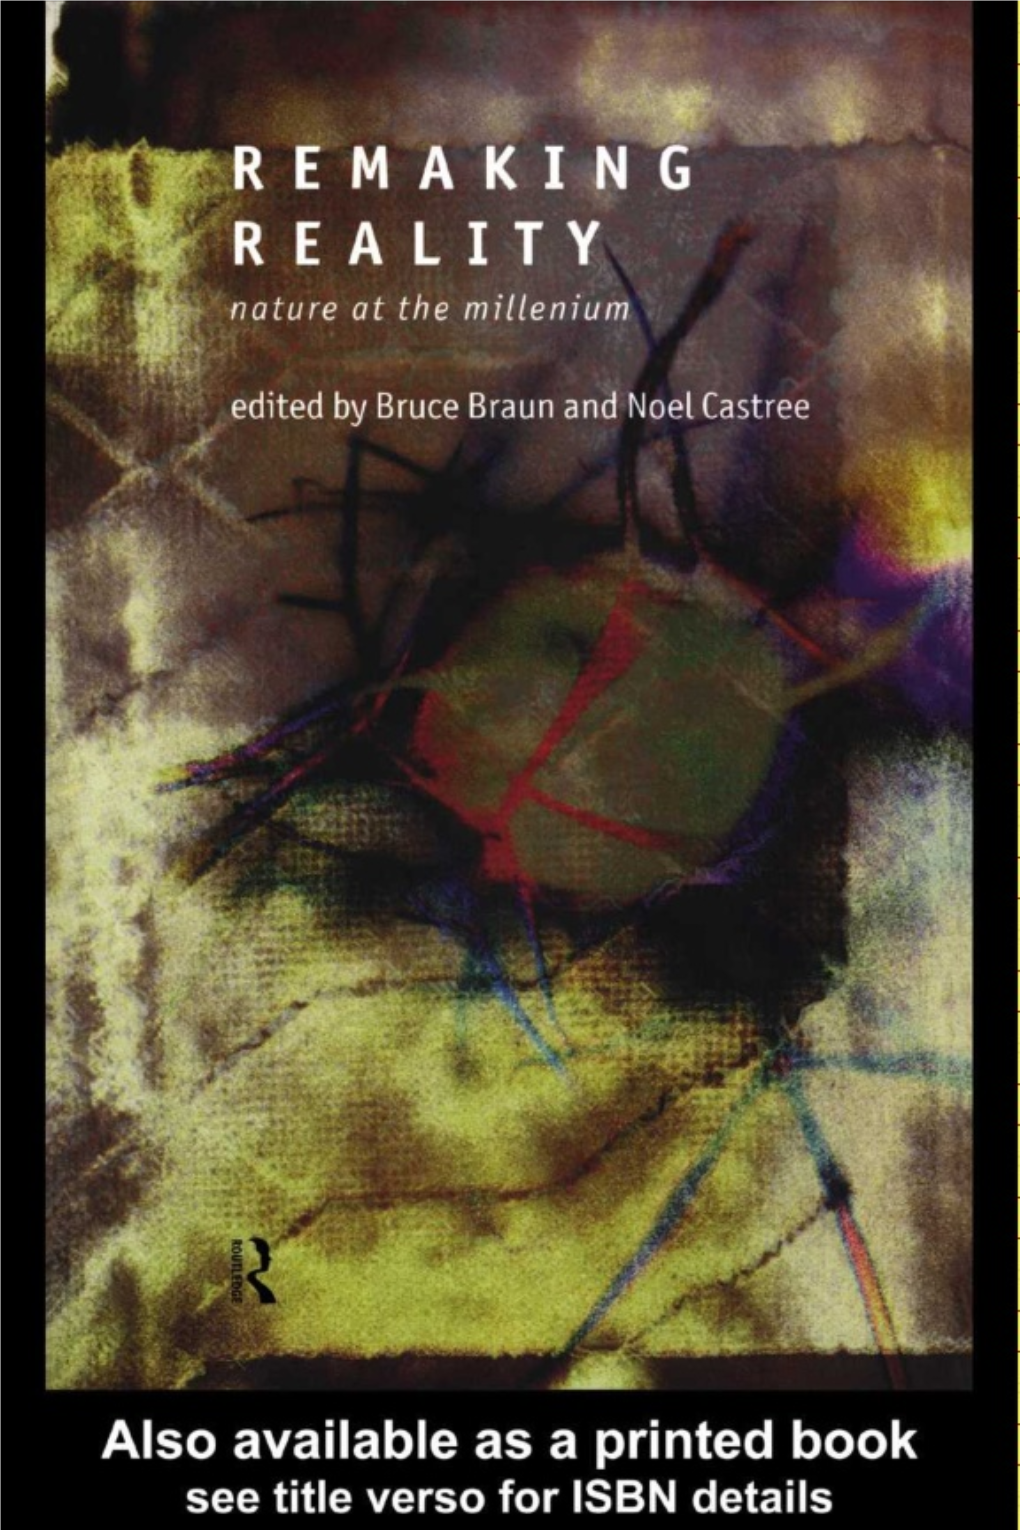 Remaking Reality: Nature at the Millenium/Edited by Bruce Braun and Noel Castree